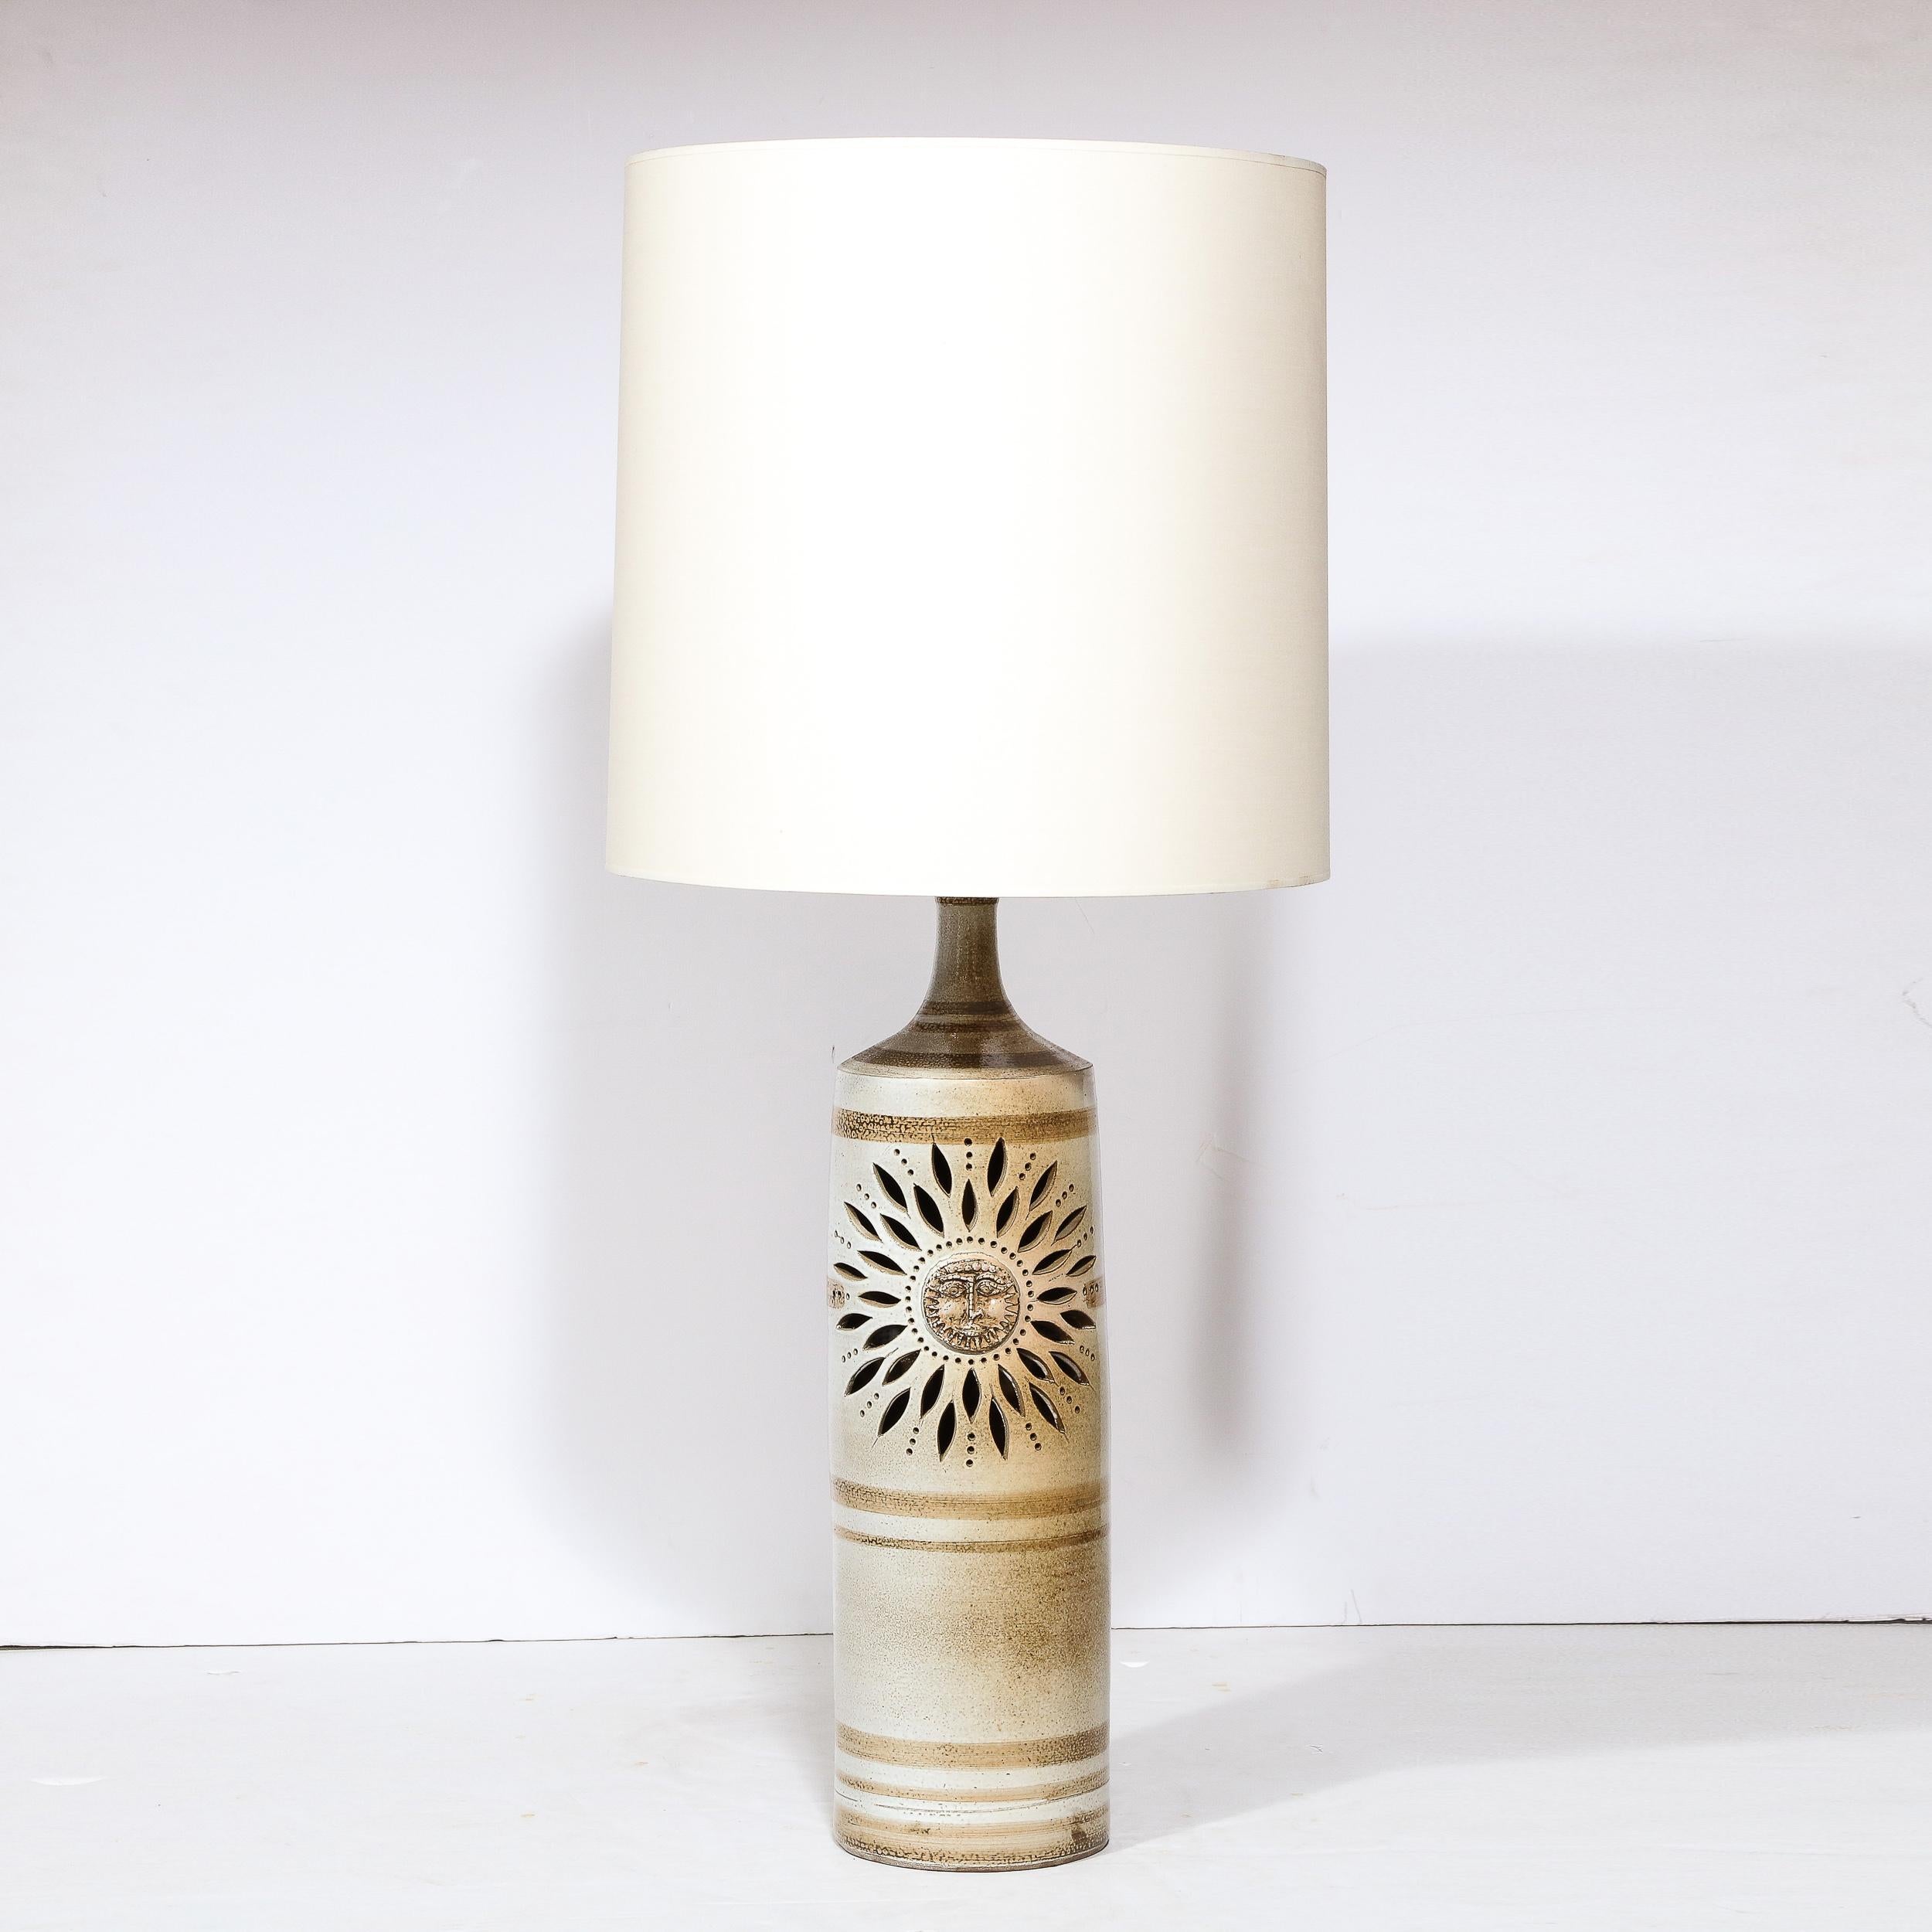 This refined Mid Century Modern ceramic handpainted table lamp was realized by the legendary Pierre Pissareff in France circa 1960. It features an mottled off white cylindrical body with horizontal ecru banding. A stylized sun motif sits the center